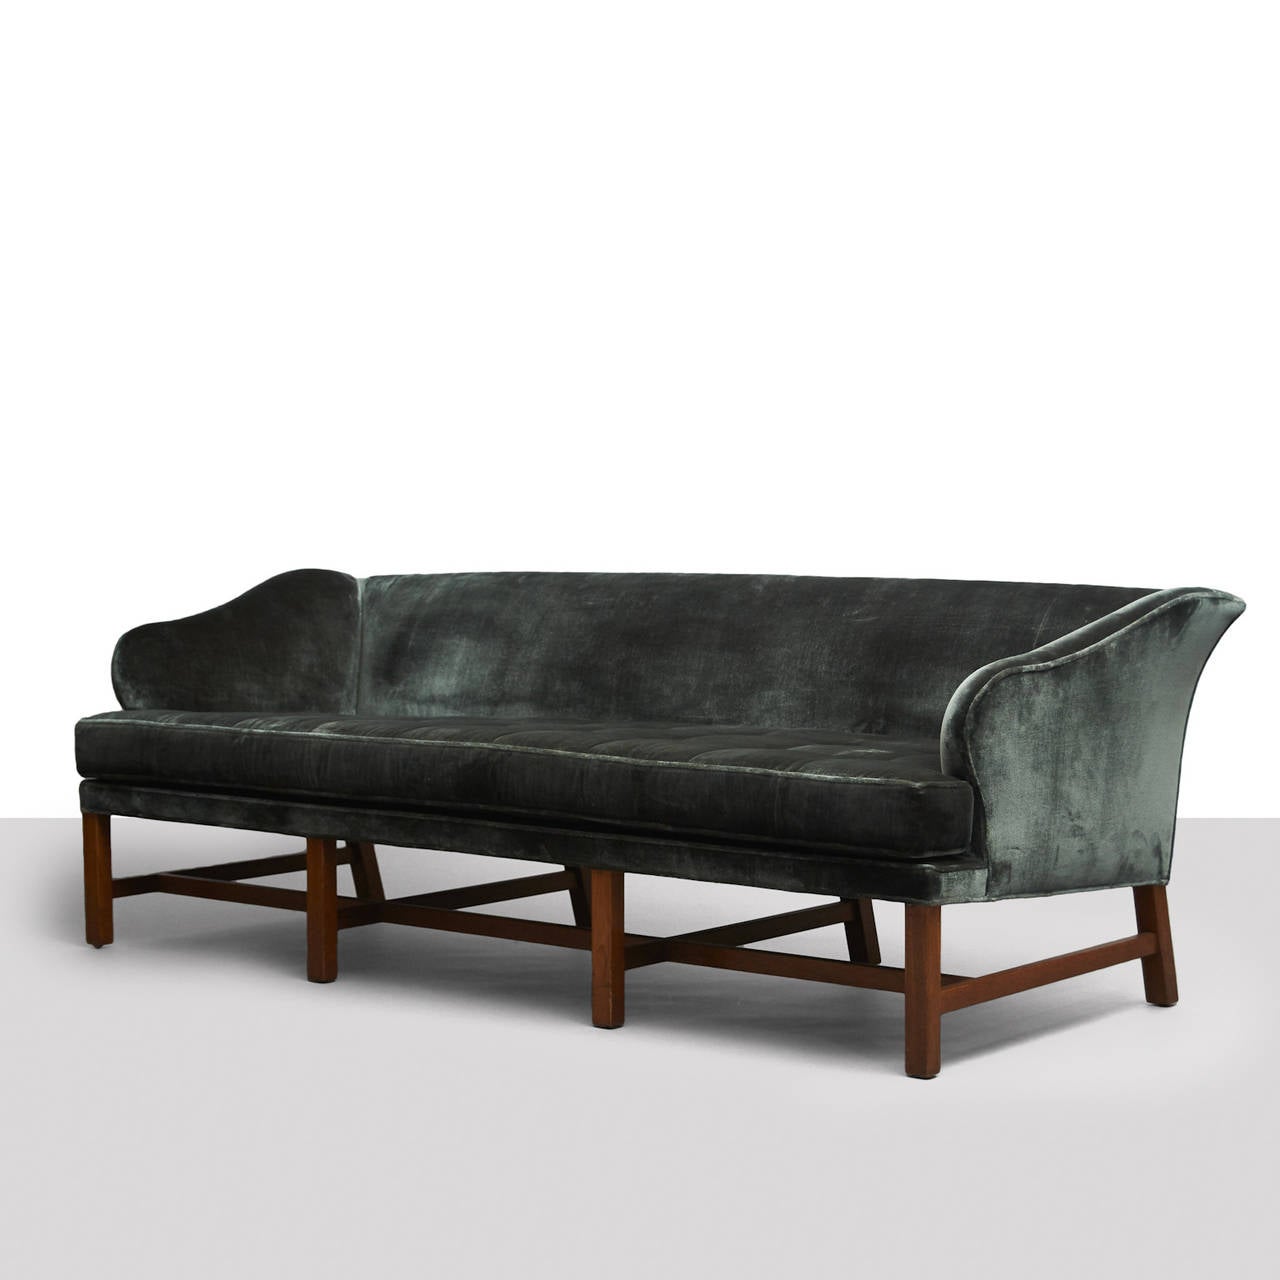 A sofa by Edward Wormley for Dunbar. Restored in a teal silk velvet with two down filled throw pillows and walnut legs.